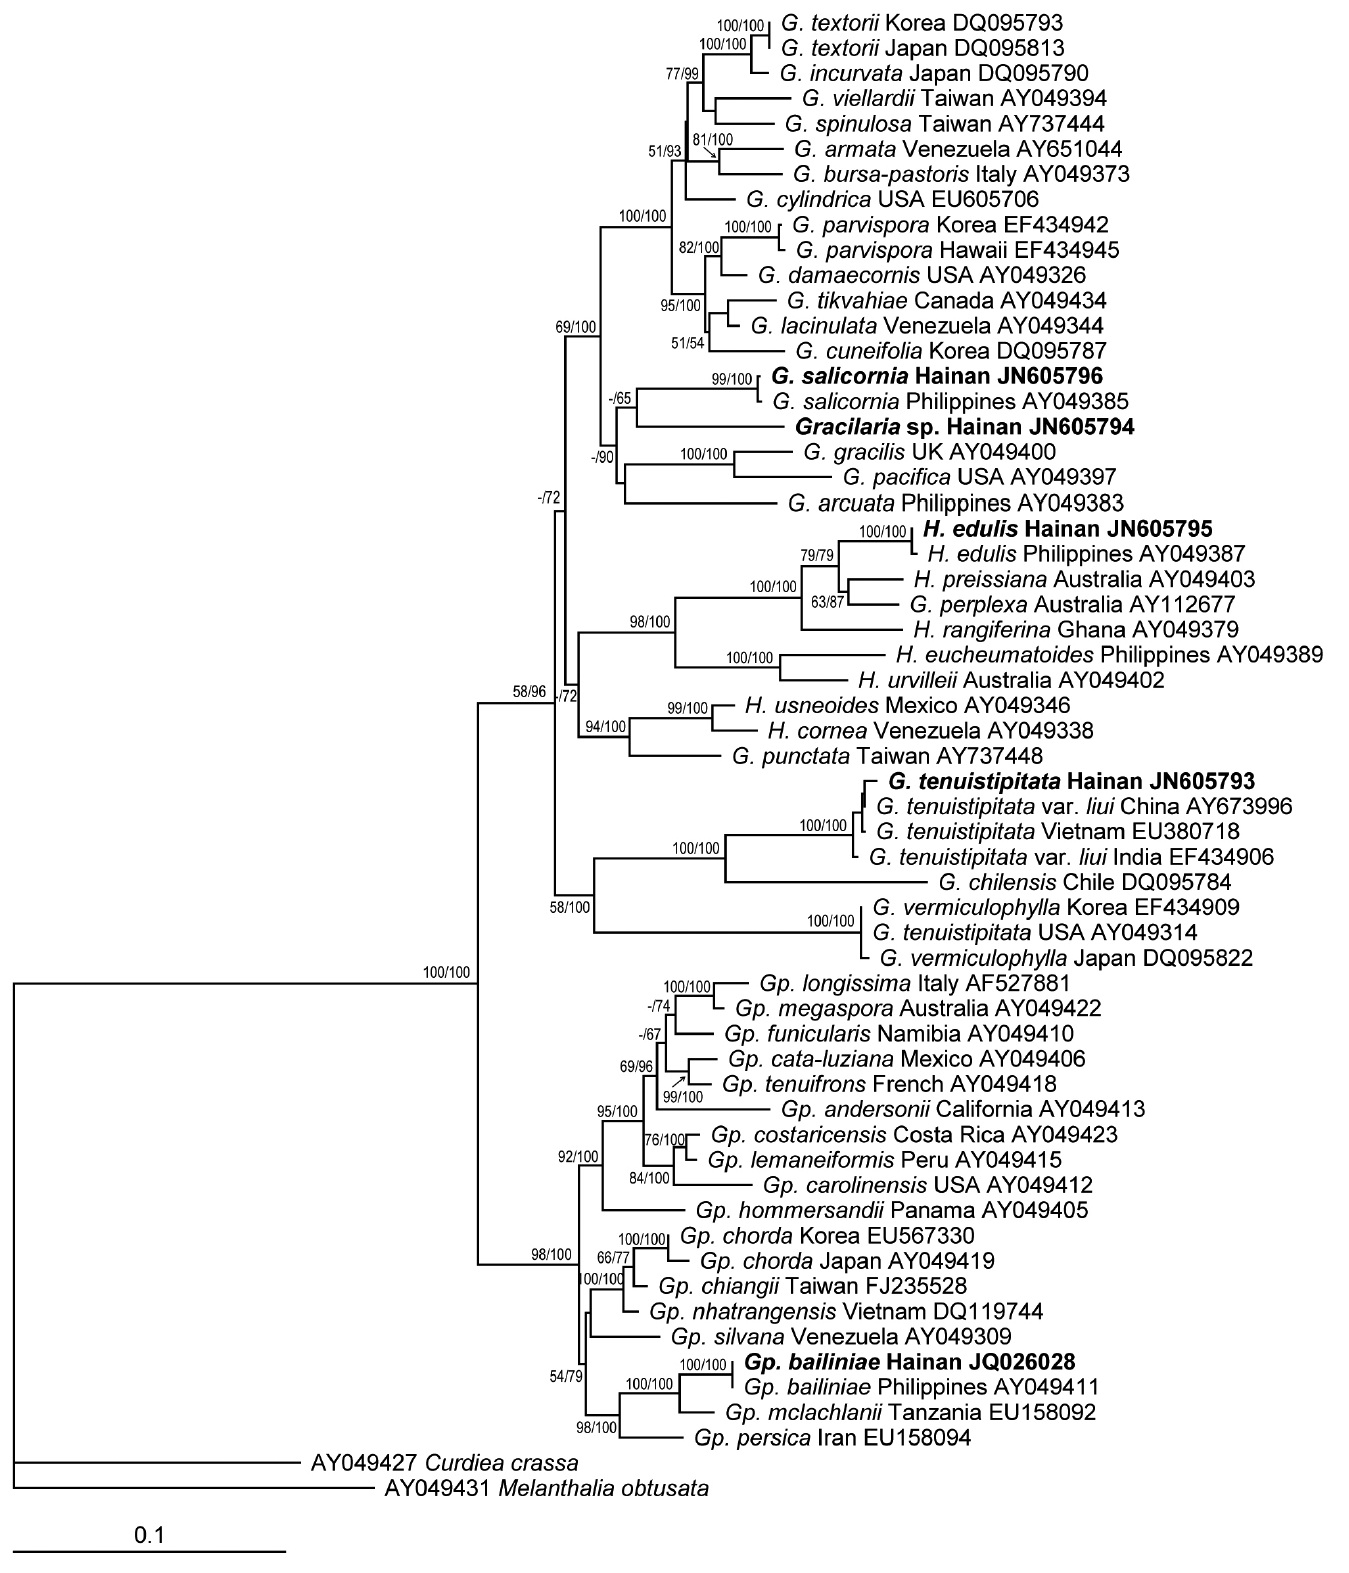 Maximum likelihood phylogenetic tree of the family Gracilariaceae estimated using rbcL sequence data. Numbers above each clade represent maximum likelihood bootstrap values and Bayesian posterior probabilities, respectively. Species name of the boldface type are shown the specimens from Hainan Island, China. Scale bar represents: substitutions / site.